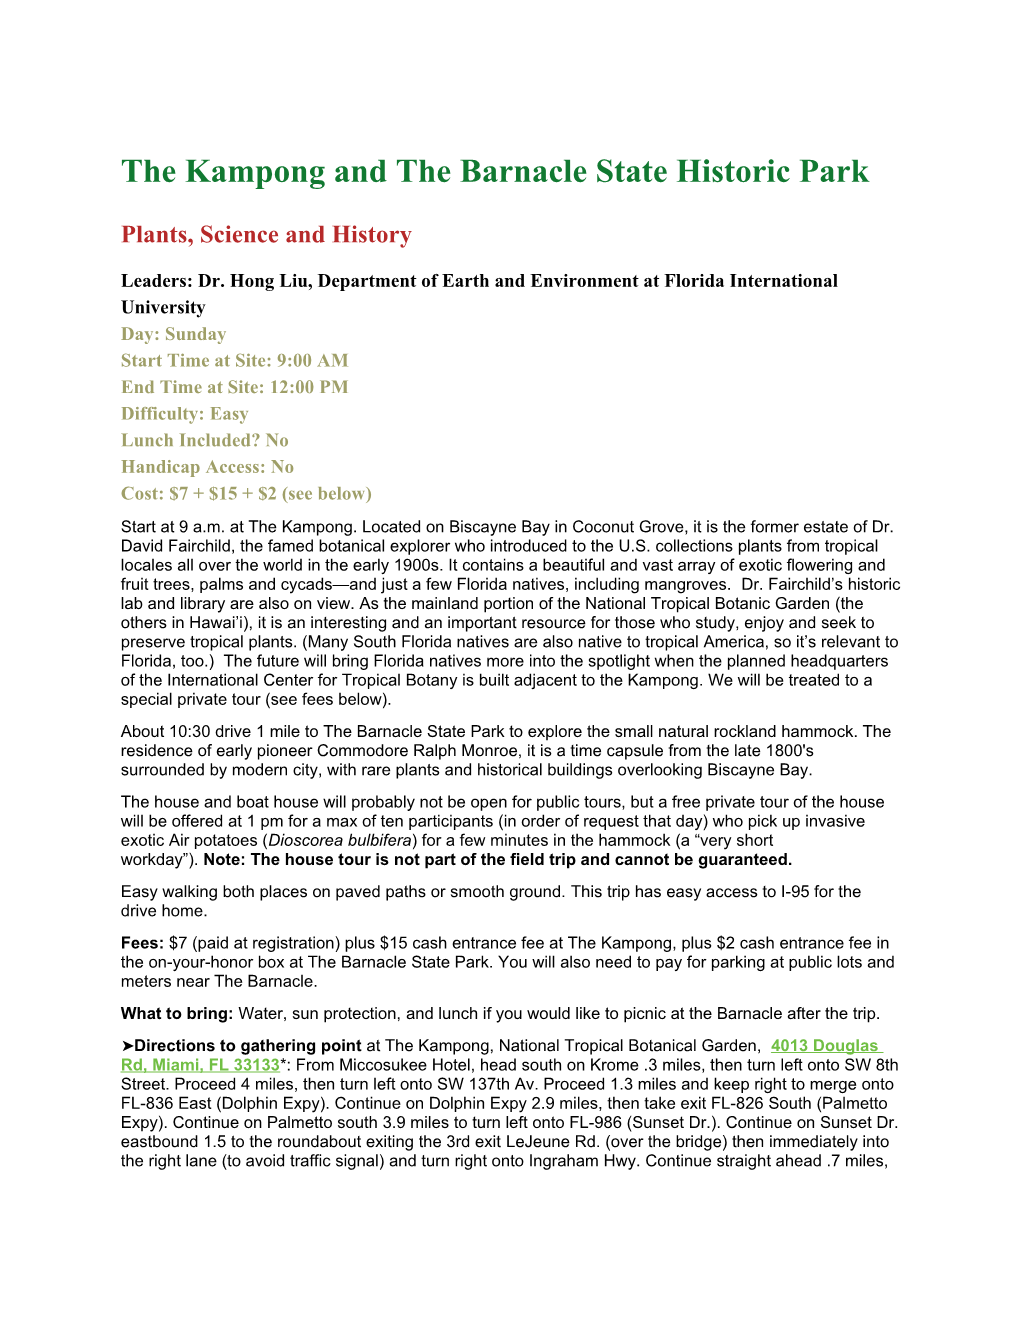 The Kampong and the Barnacle State Historic Park